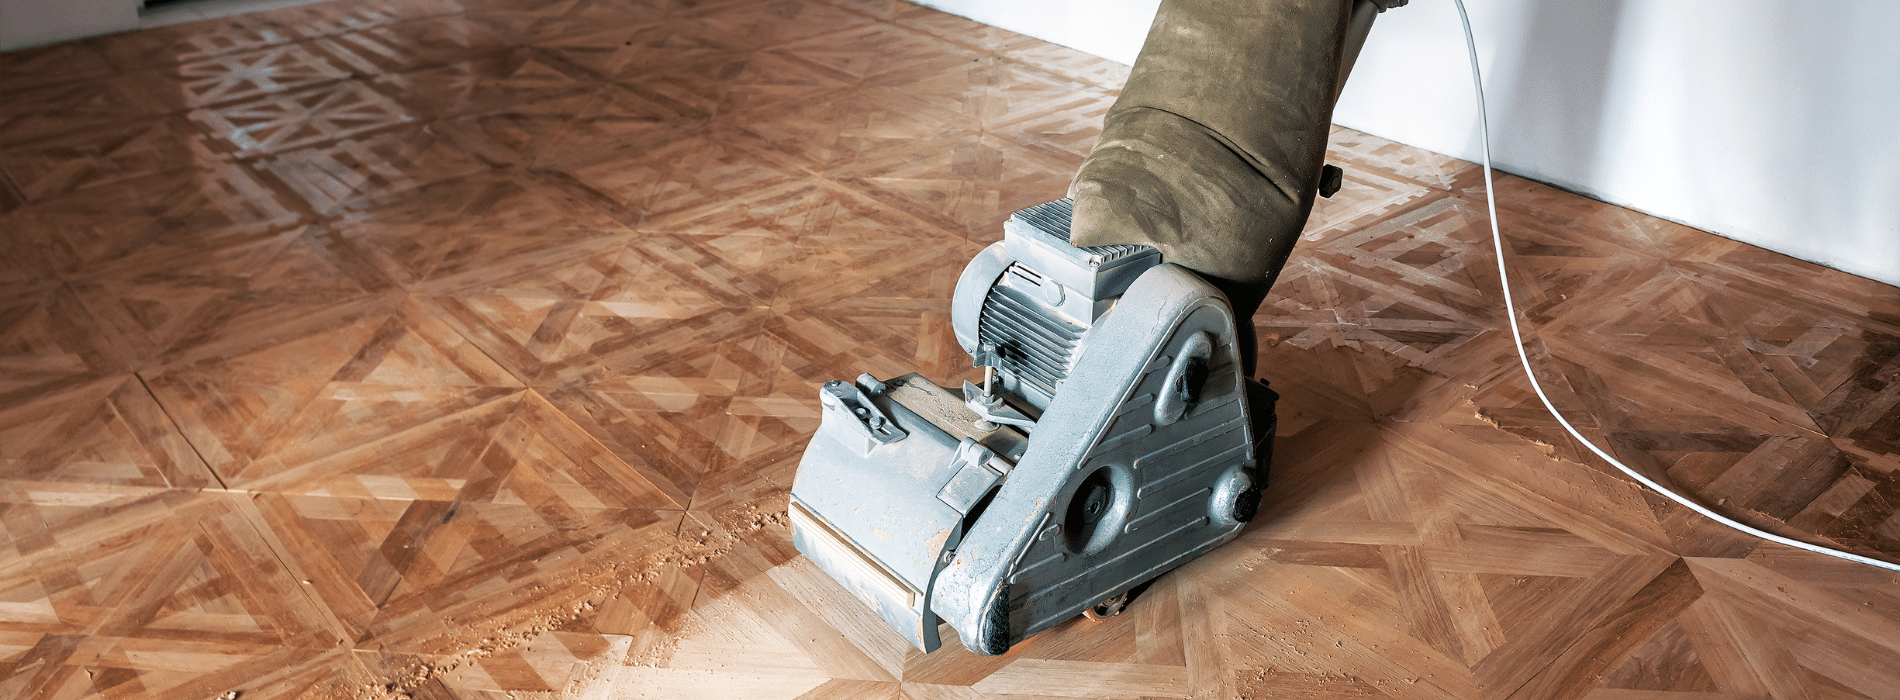 In Finsbury Park, N4, Experience the skill of Mr Sander® as they sand a hardwood floor using the powerful Dimension d407mm Bona belt sander. With an impressive 1900 effect, operating at 230V and a frequency of 50/60 Hz, this professional-grade equipment ensures a clean and efficient result.